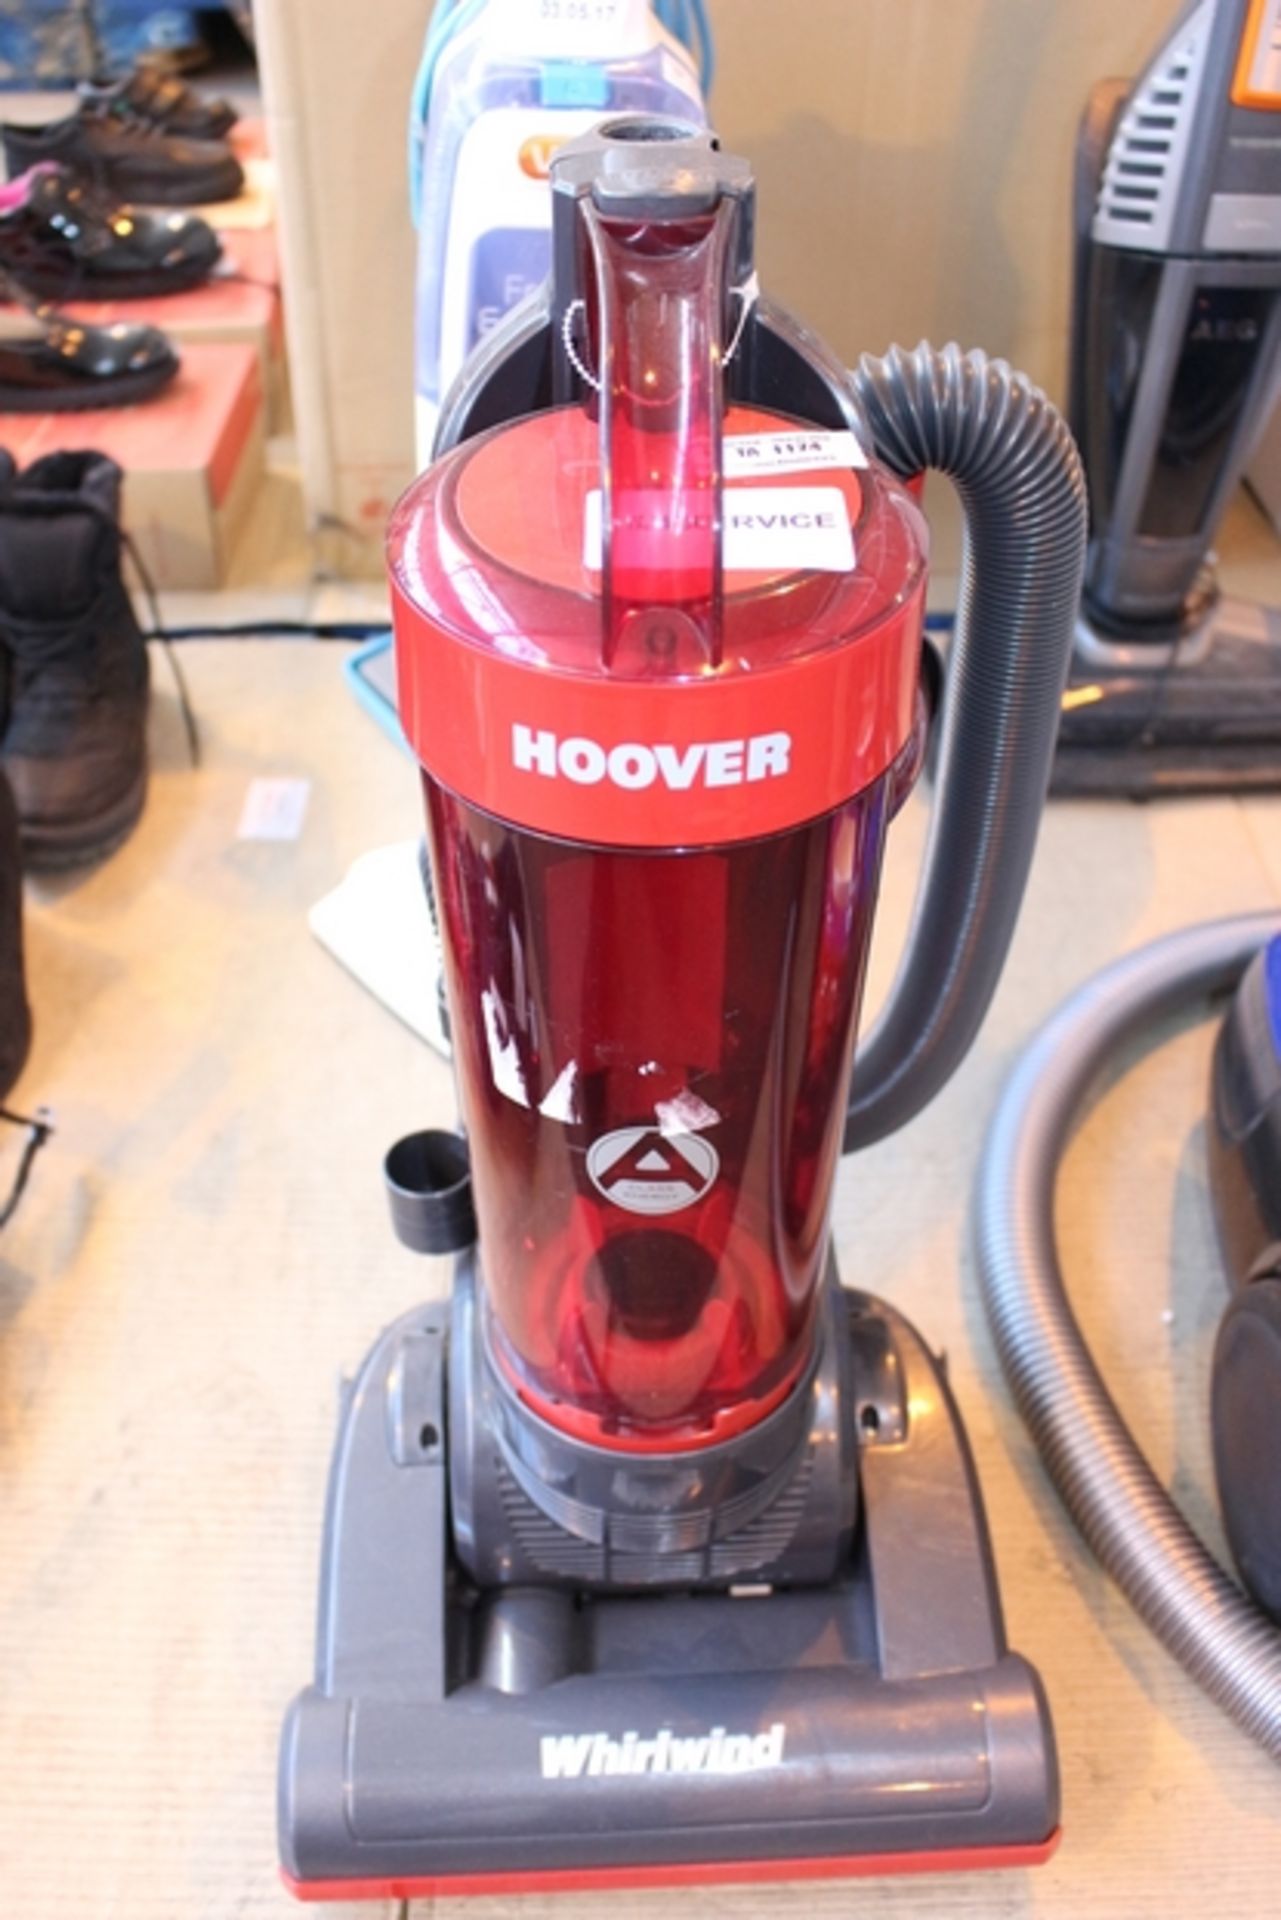 1X HOOVER WHIRL WIND VACUUM CLEANER (TLH-SERVICE)